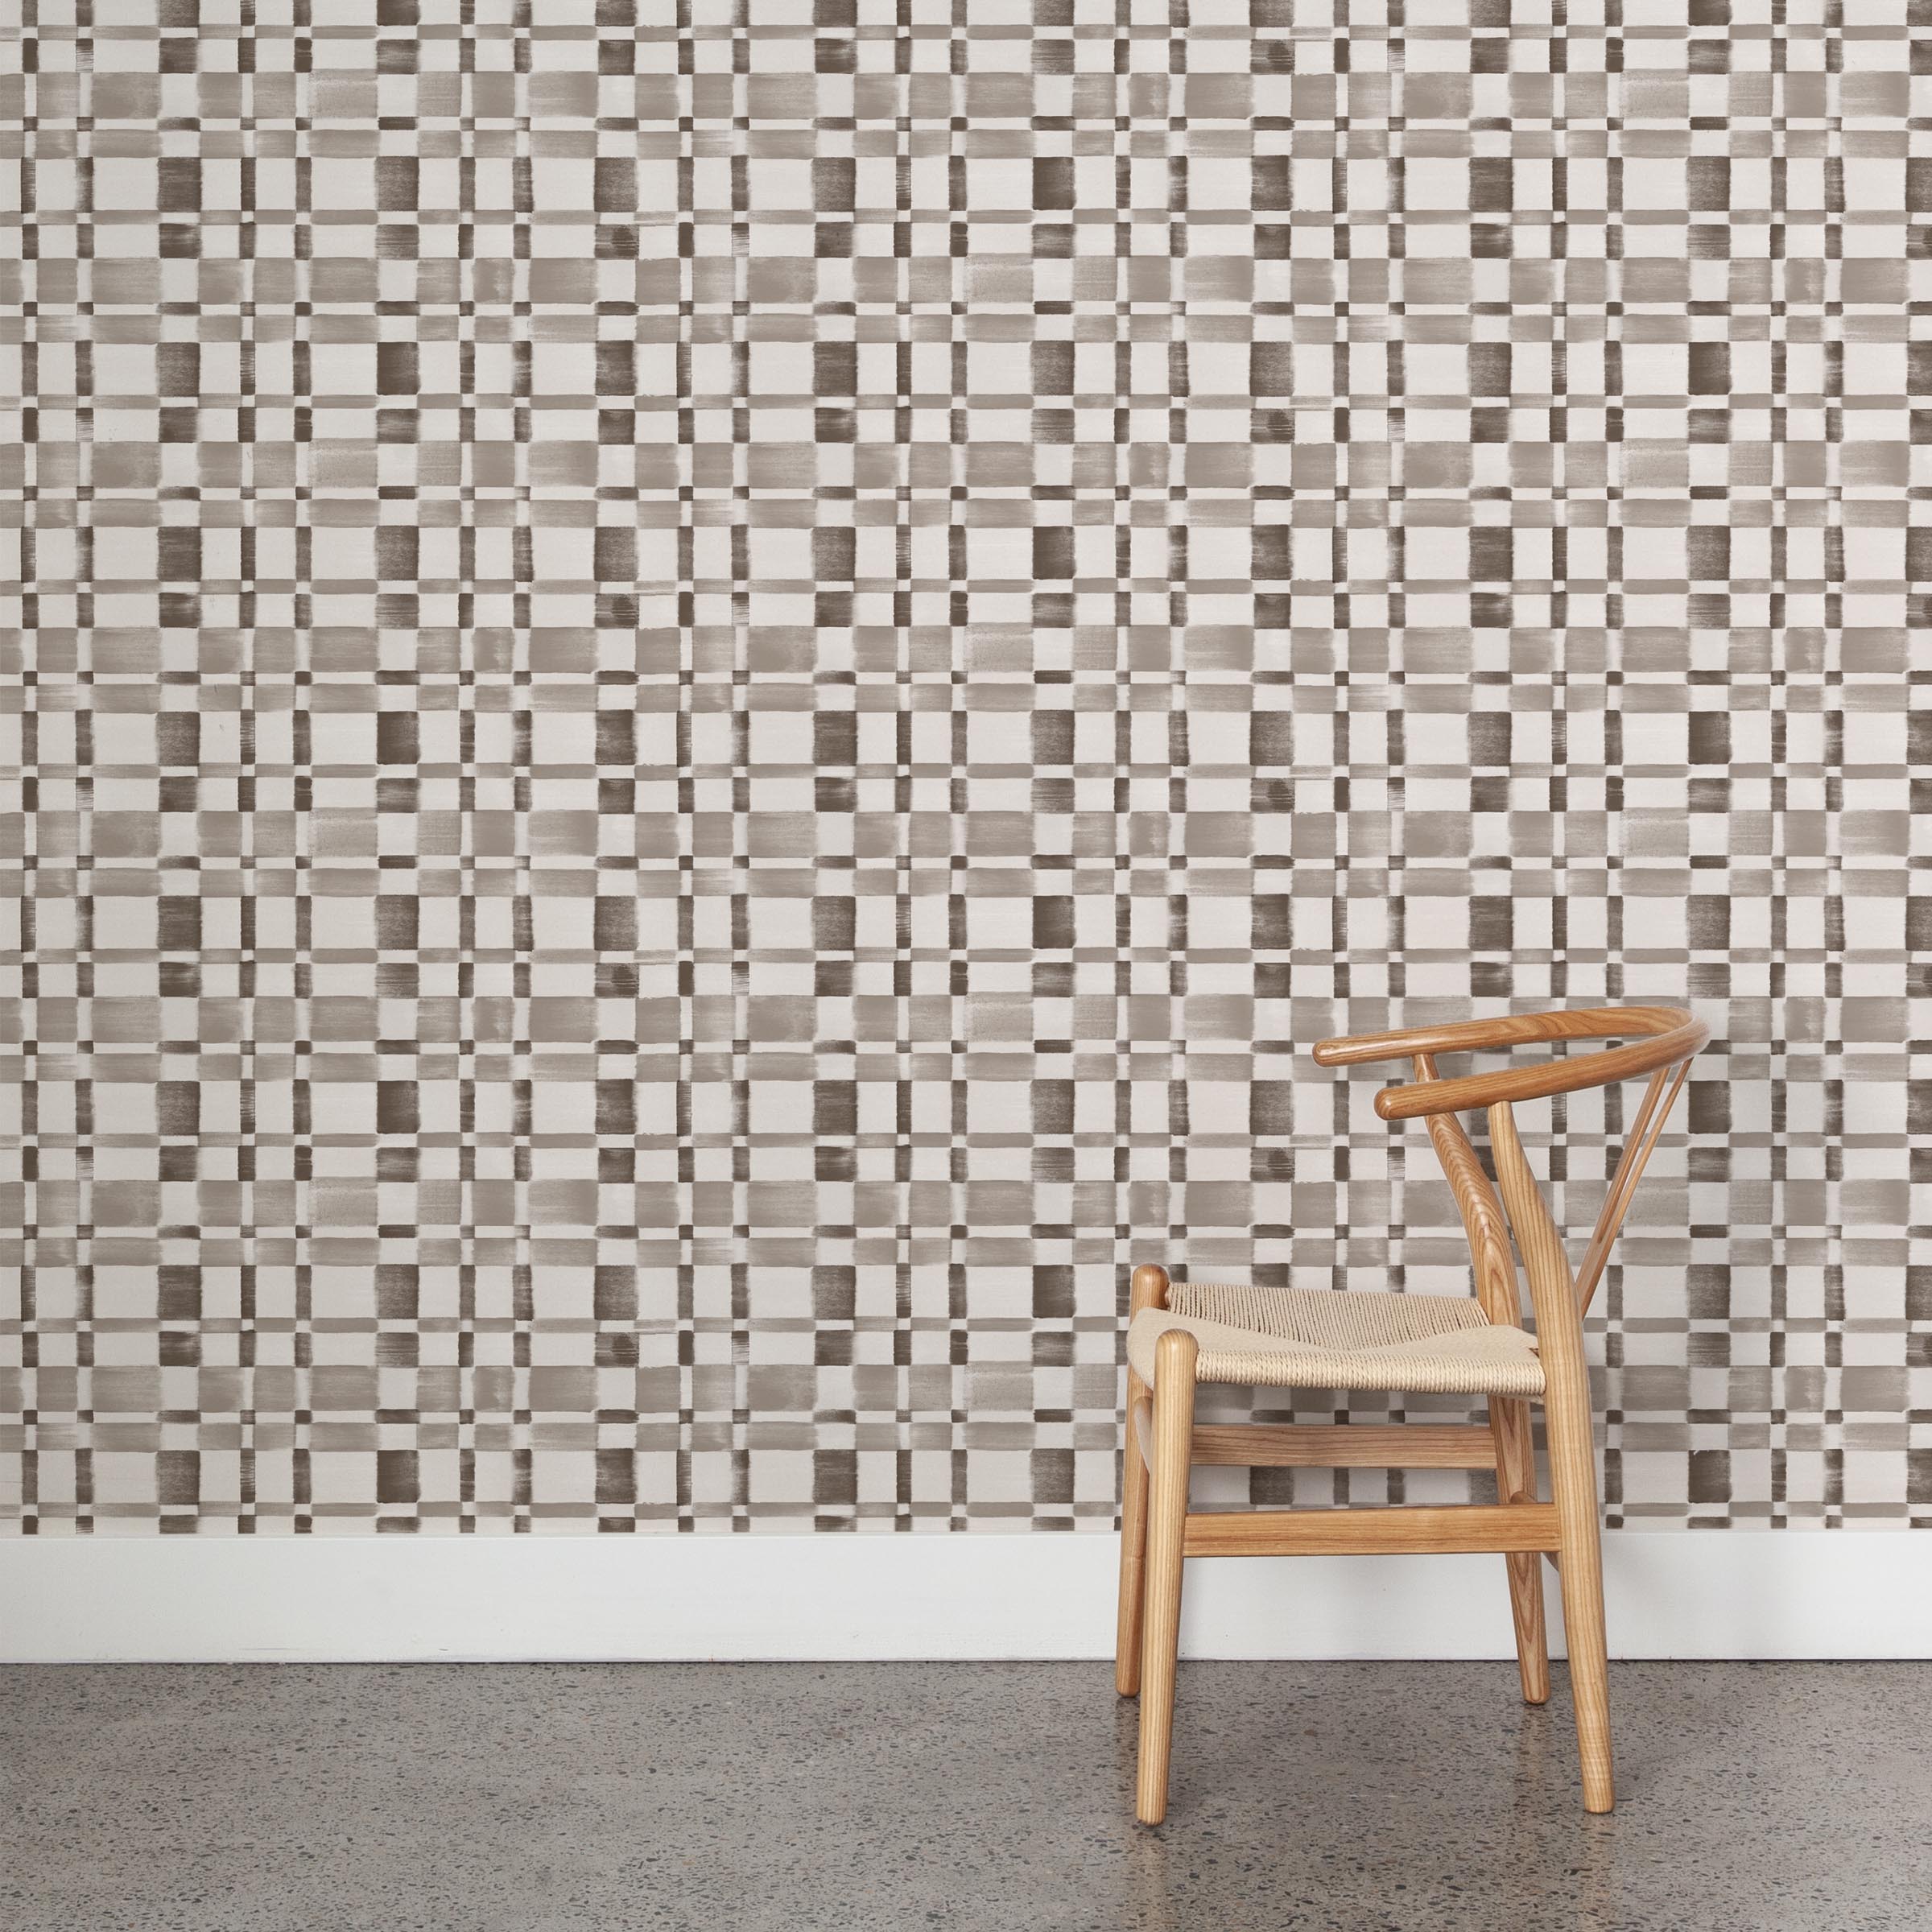 A wooden chair stands in front of a wall papered in a large-scale checked pattern in shades of greige and white.